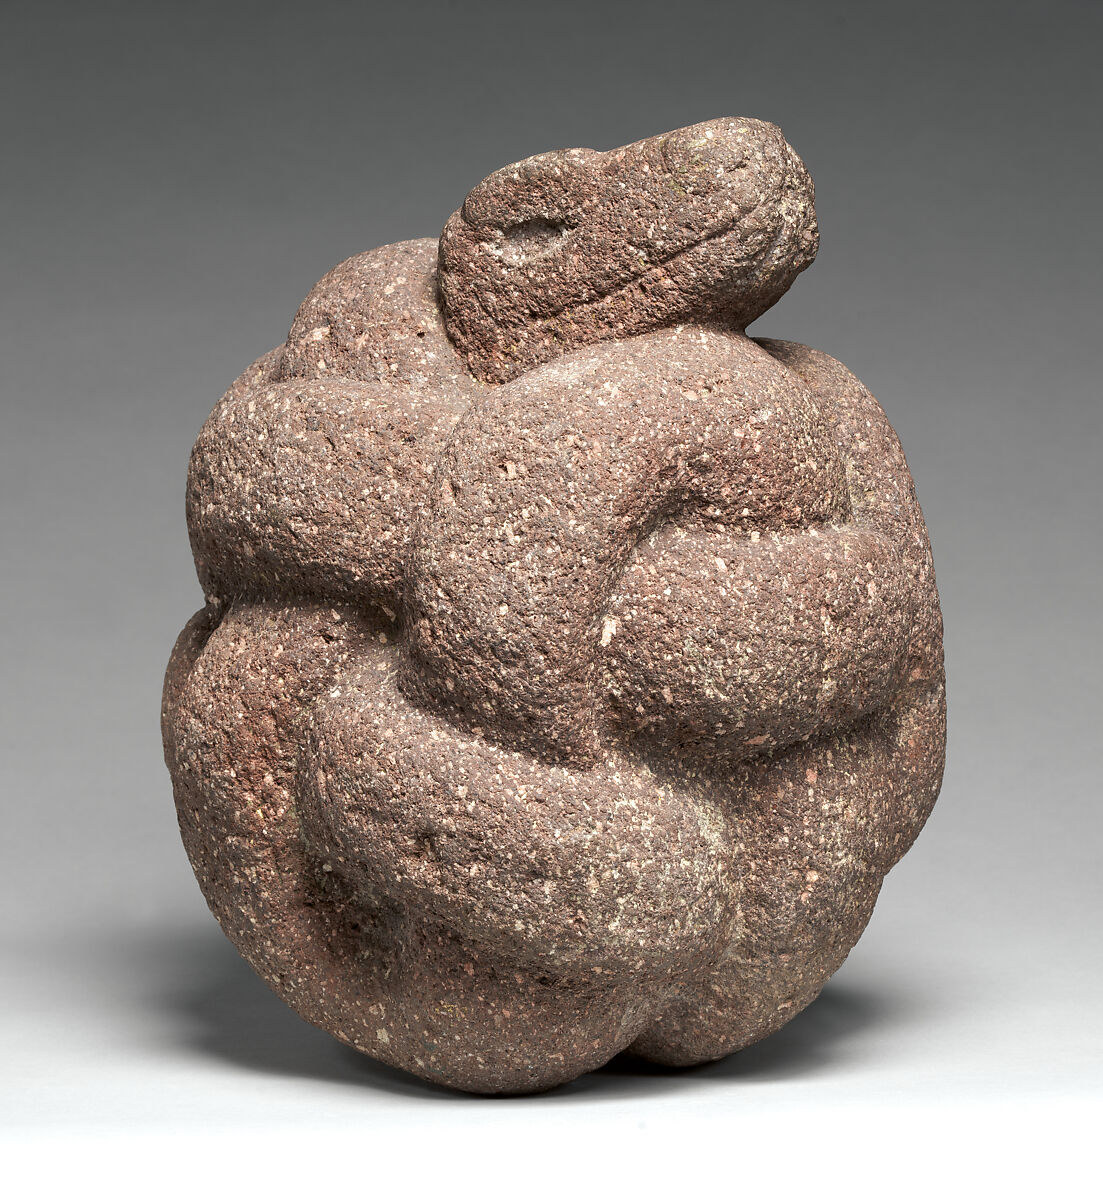 Coiled Serpent, Stone, Aztec 